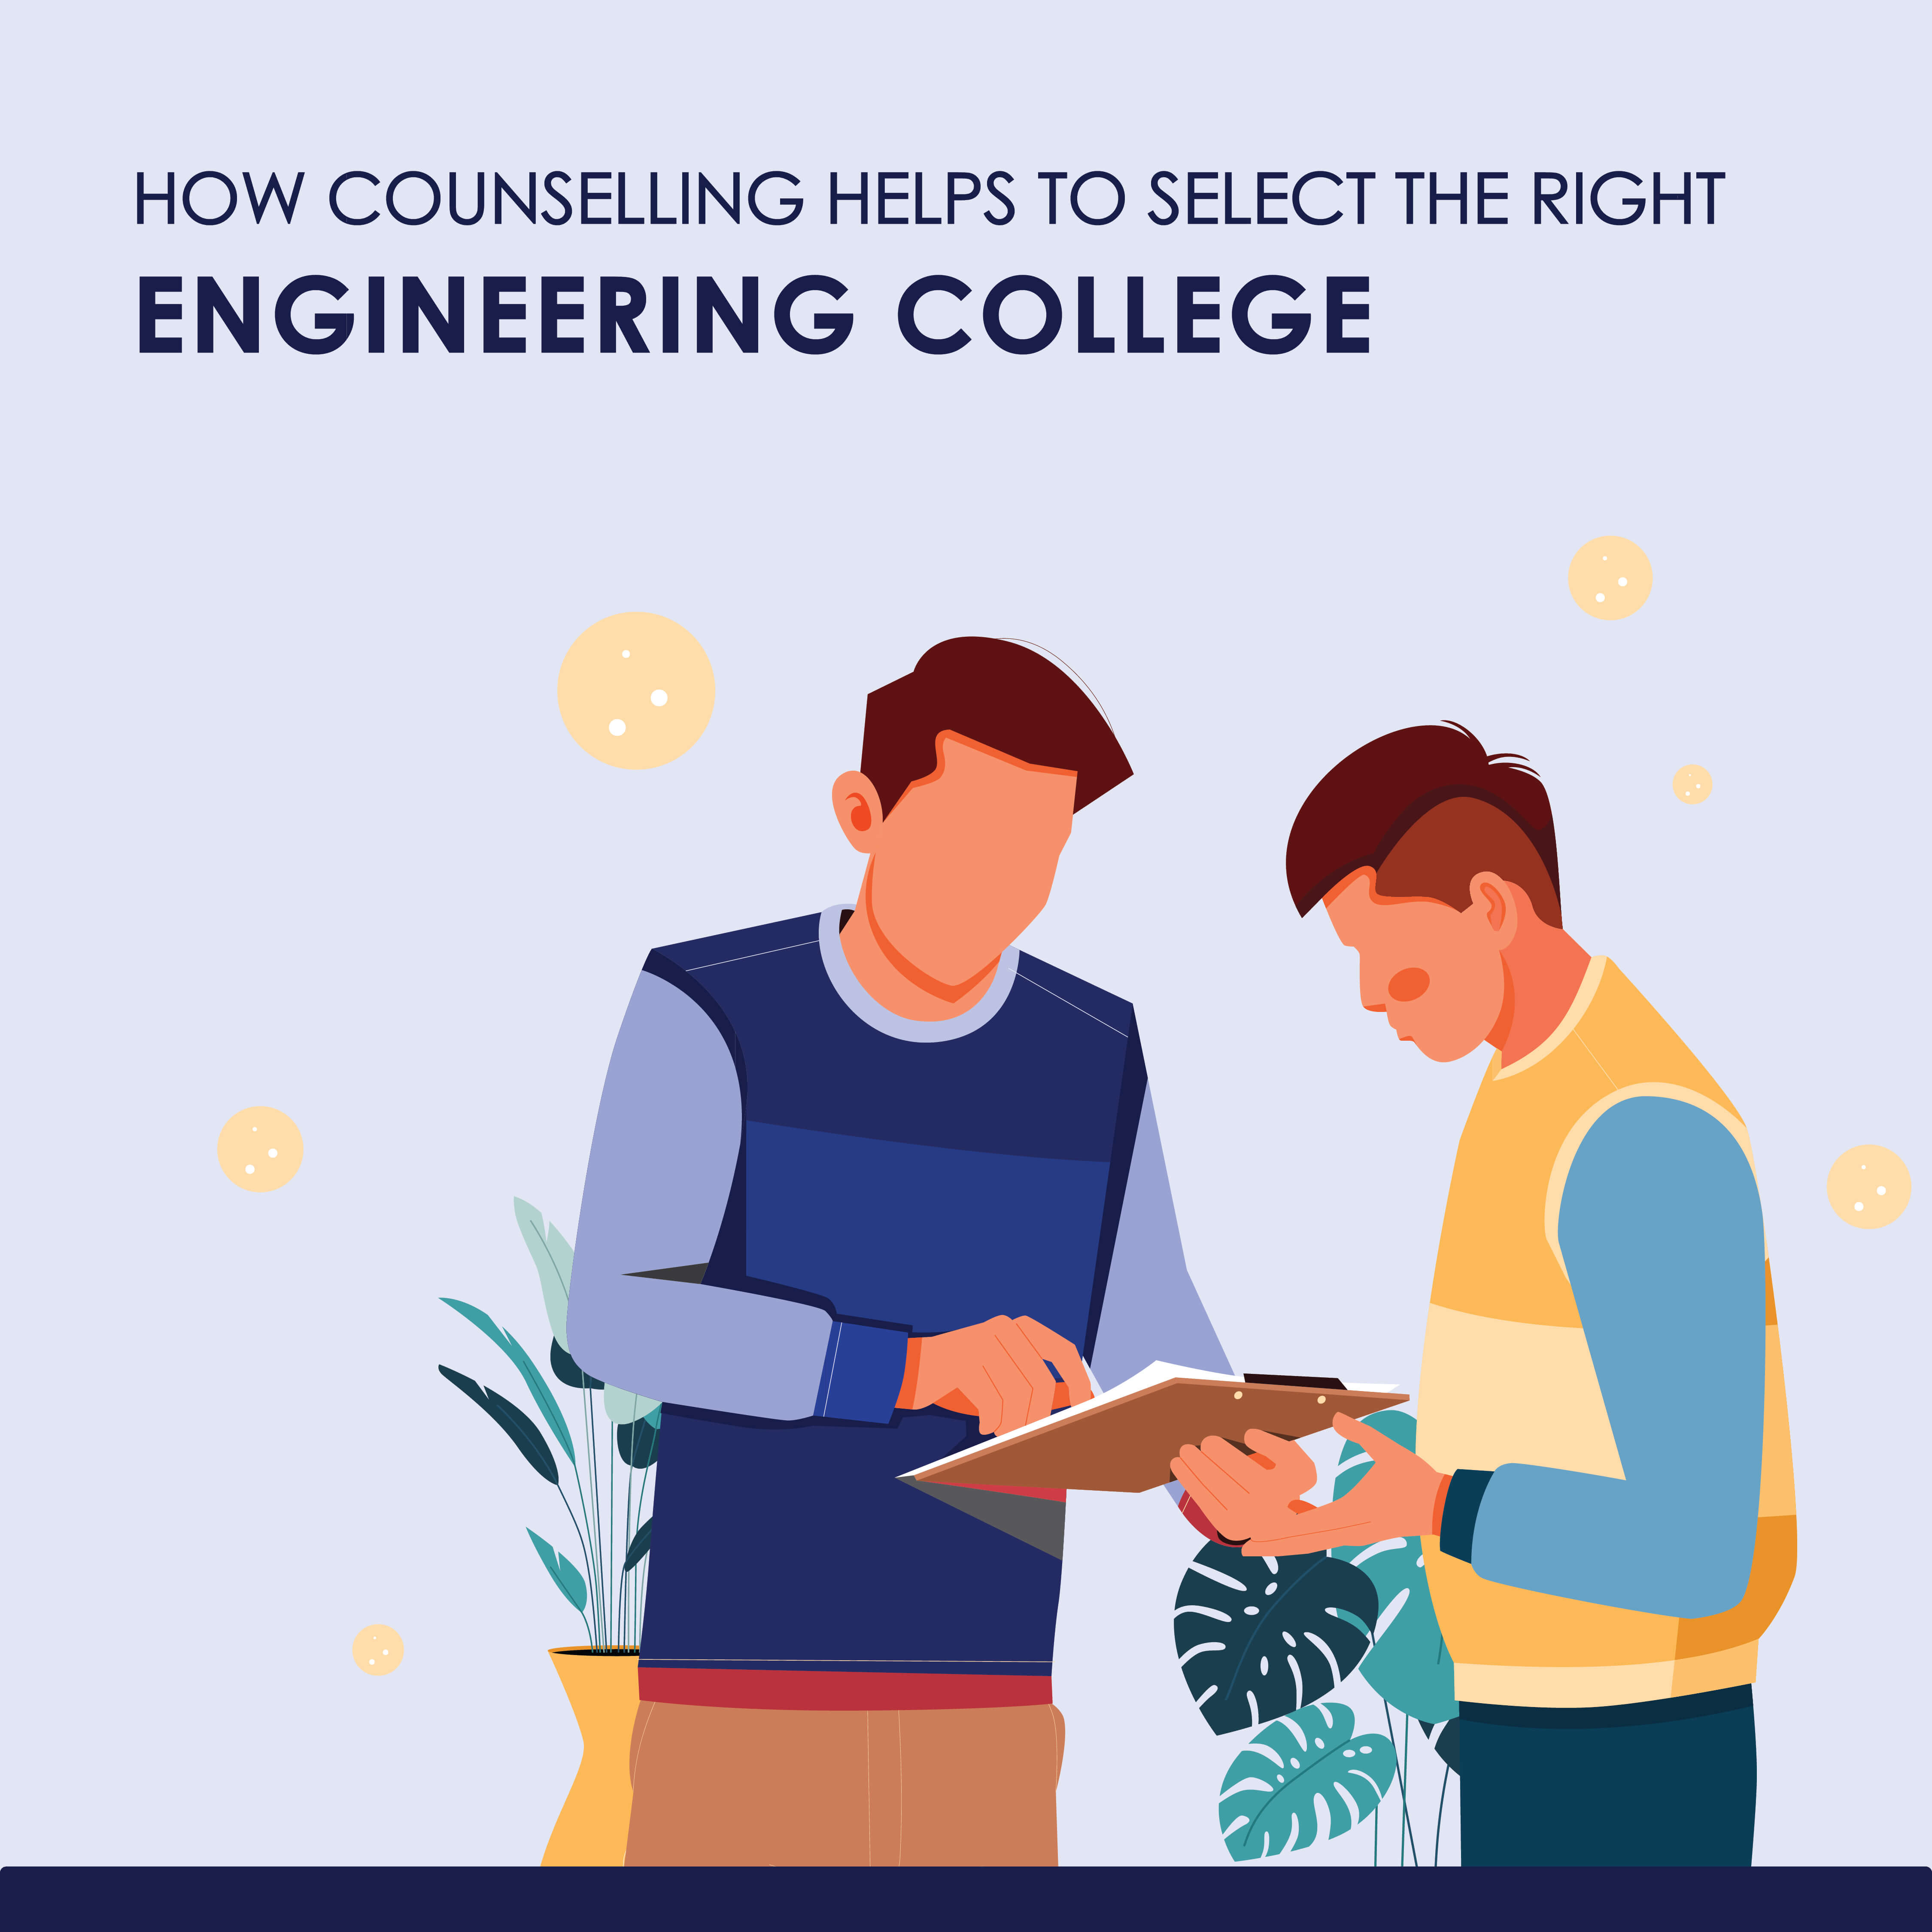 Selecting Engineering College with Counseling